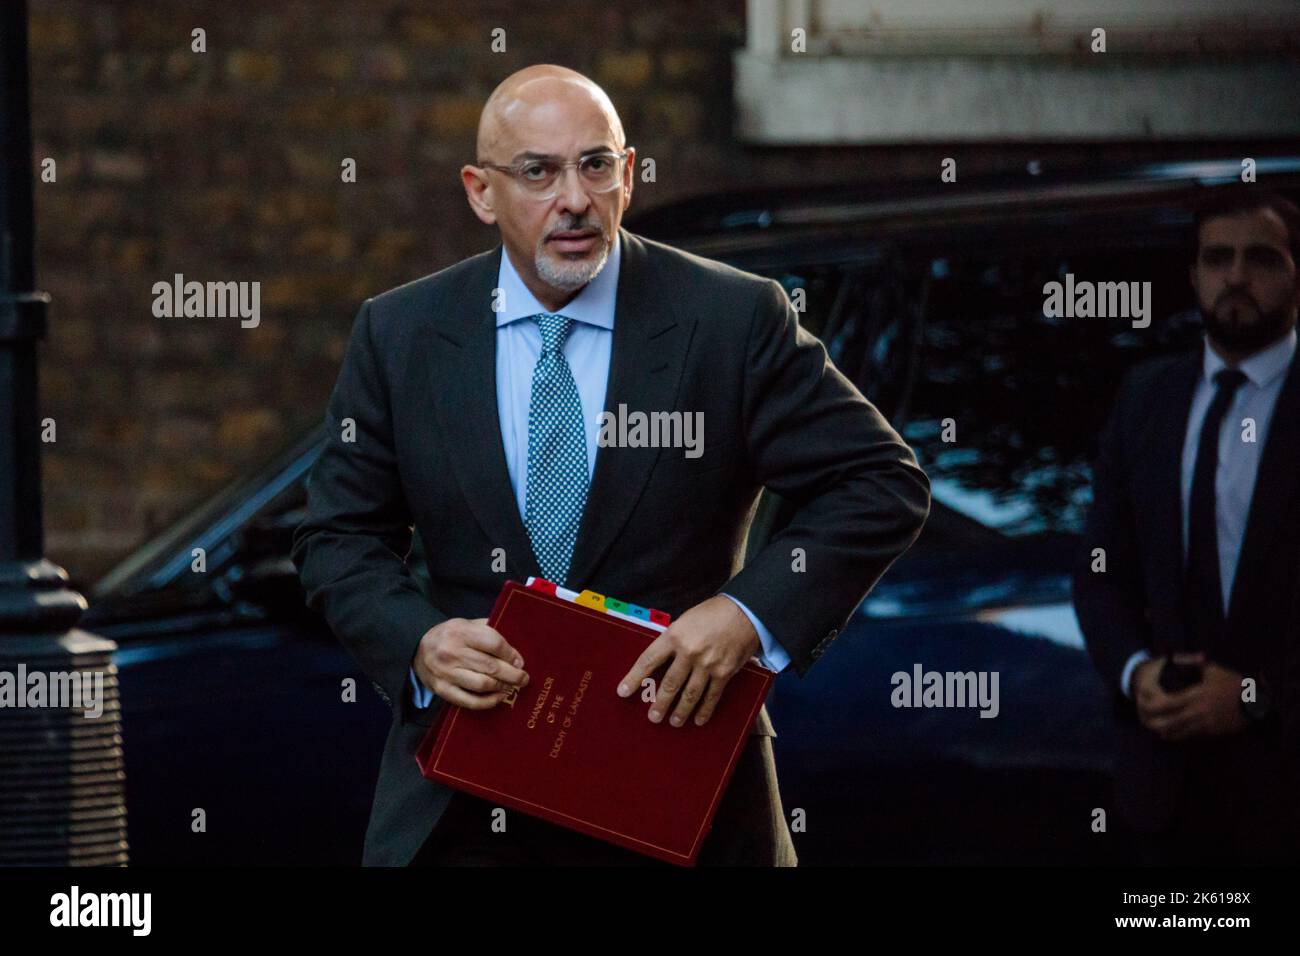 Downing Street, London, UK. 11th October 2022. Ministers attend the first Cabinet Meeting at 10 Downing Street since the Conservative Party Conference last week. Nadhim Zahawi MP, Chancellor of the Duchy of Lancaster, Minister for Intergovernmental Relations and Minister for Equalities. Photo:Amanda Rose/Alamy Live News Stock Photo